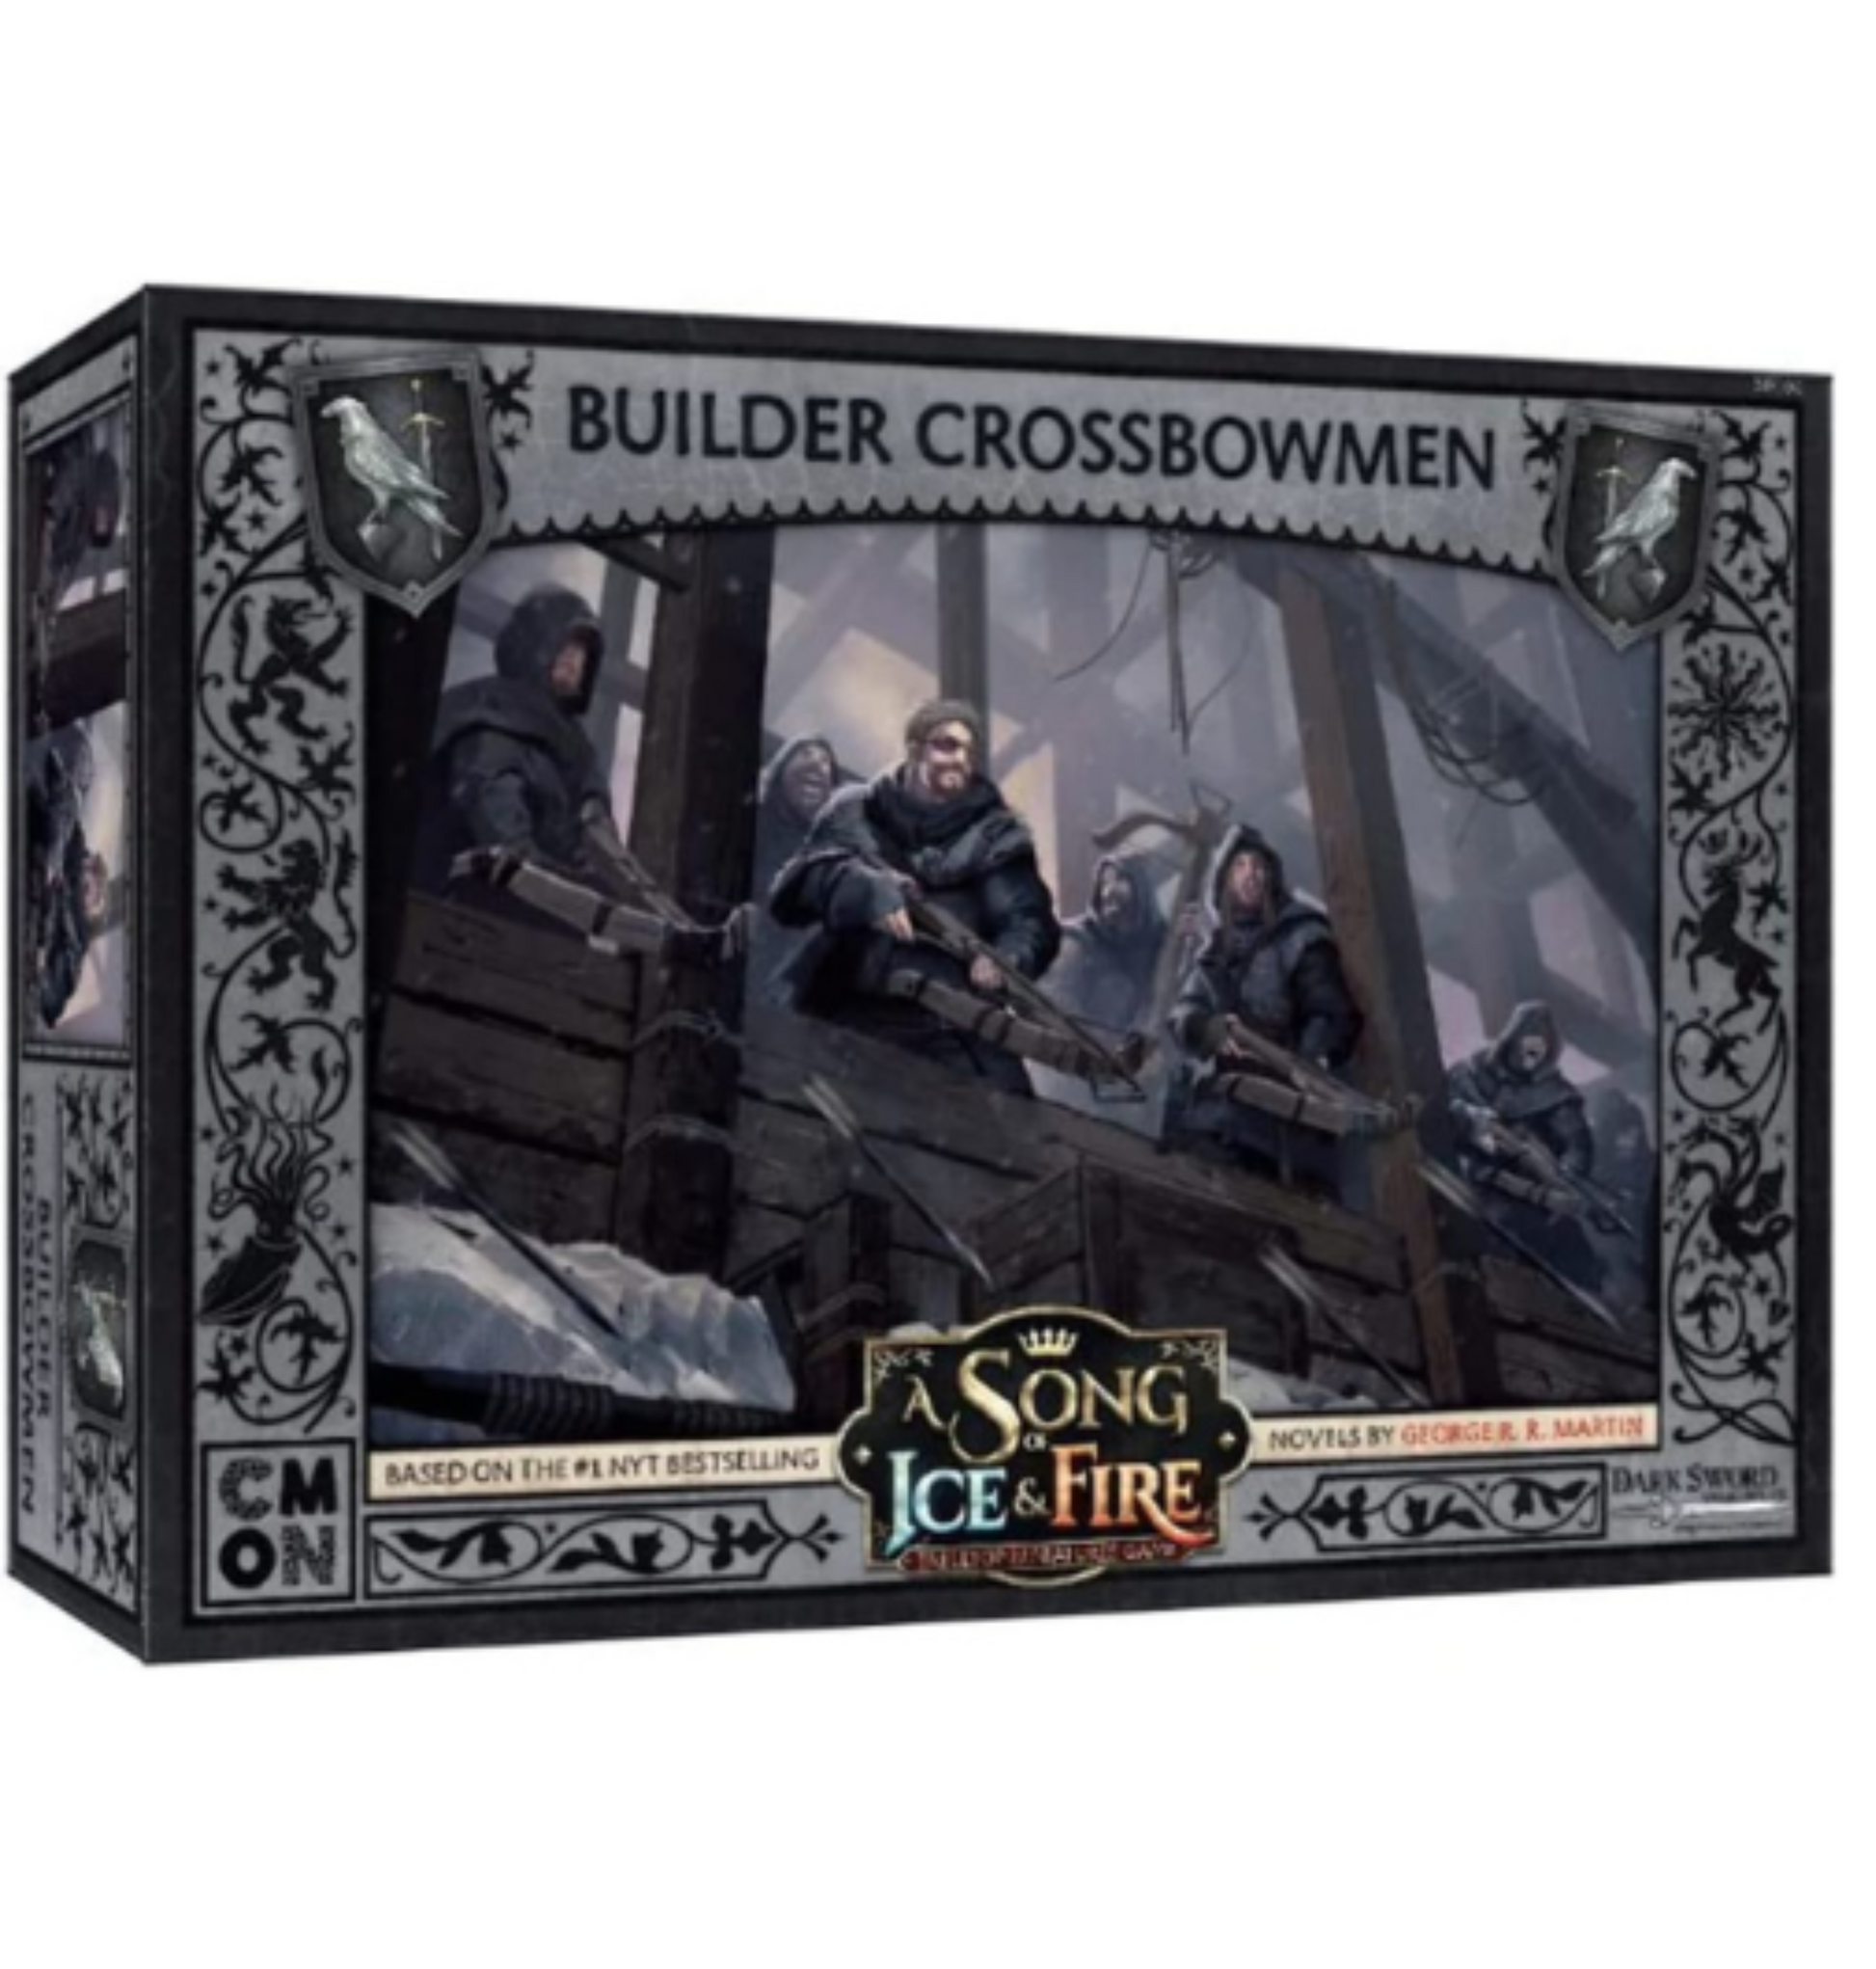 A Song of Ice and Fire - Night's Watch: Builder Crossbowmen